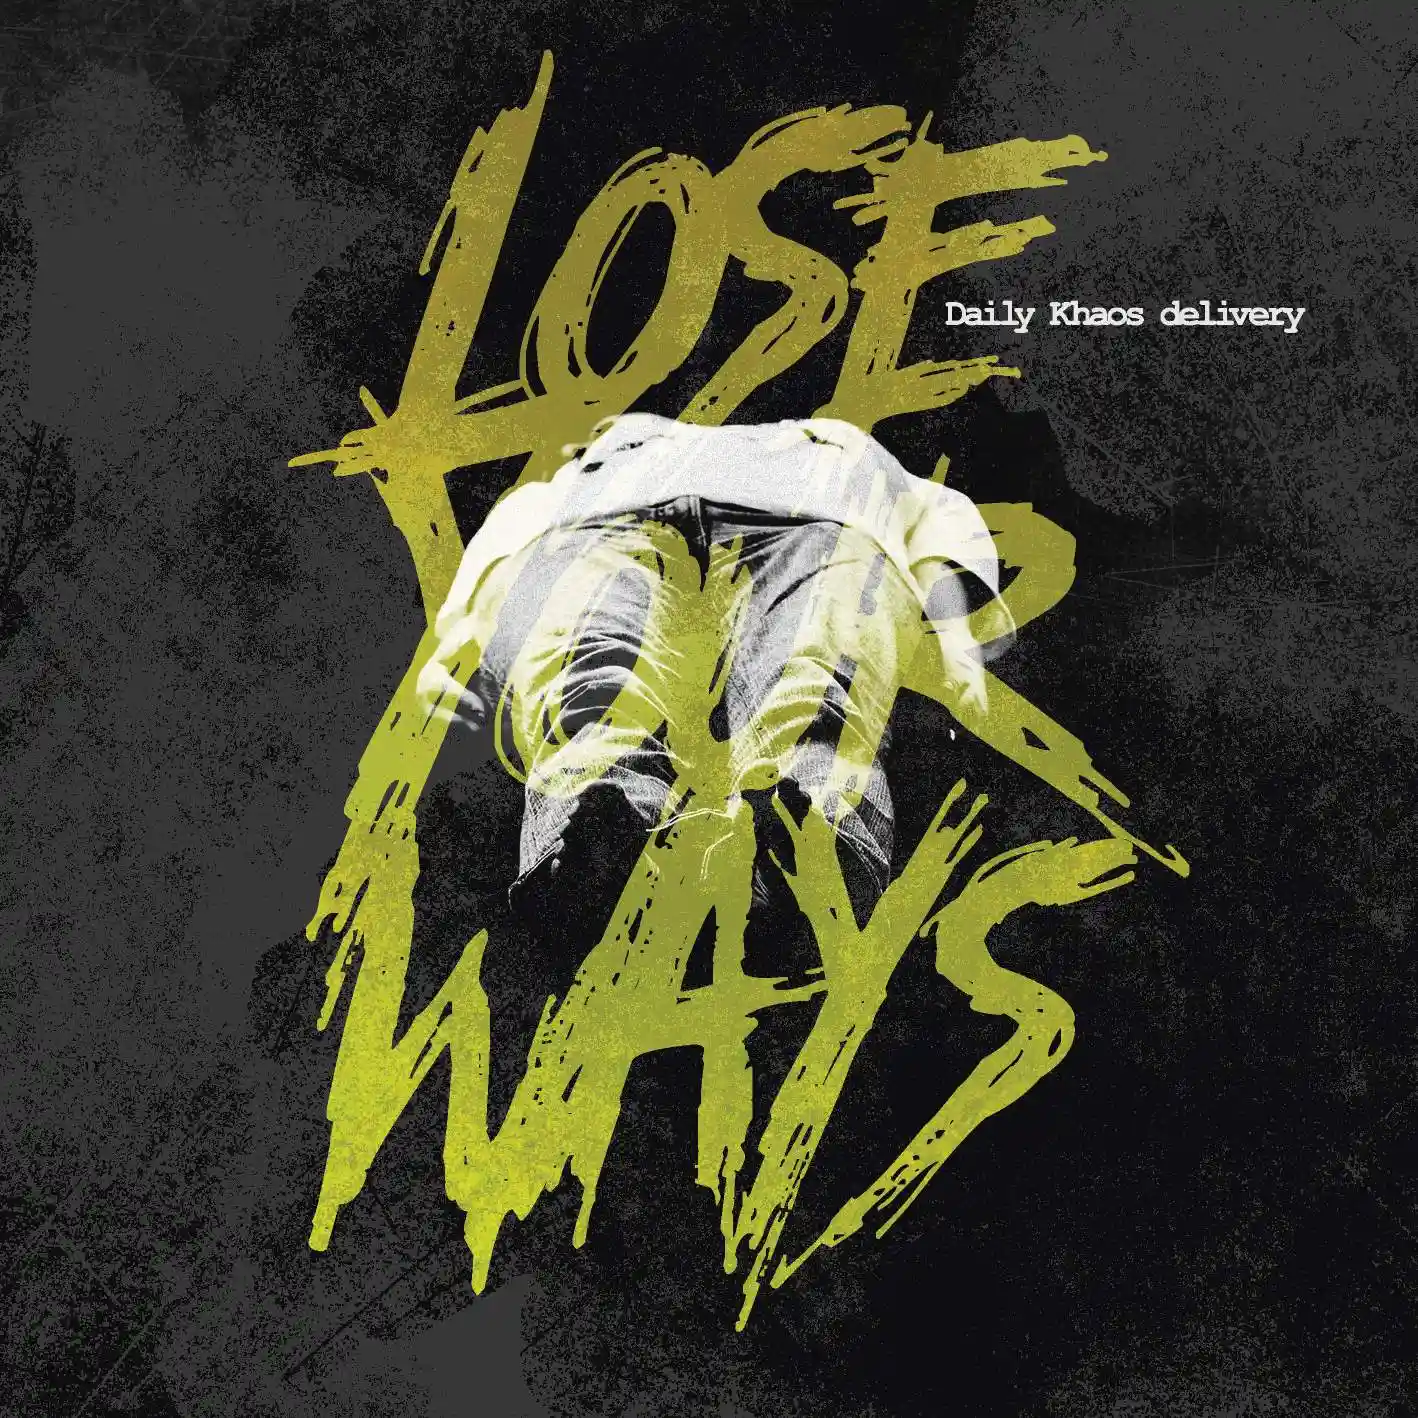 Album cover for “Lose Your Ways” by Daily Khaos delivery